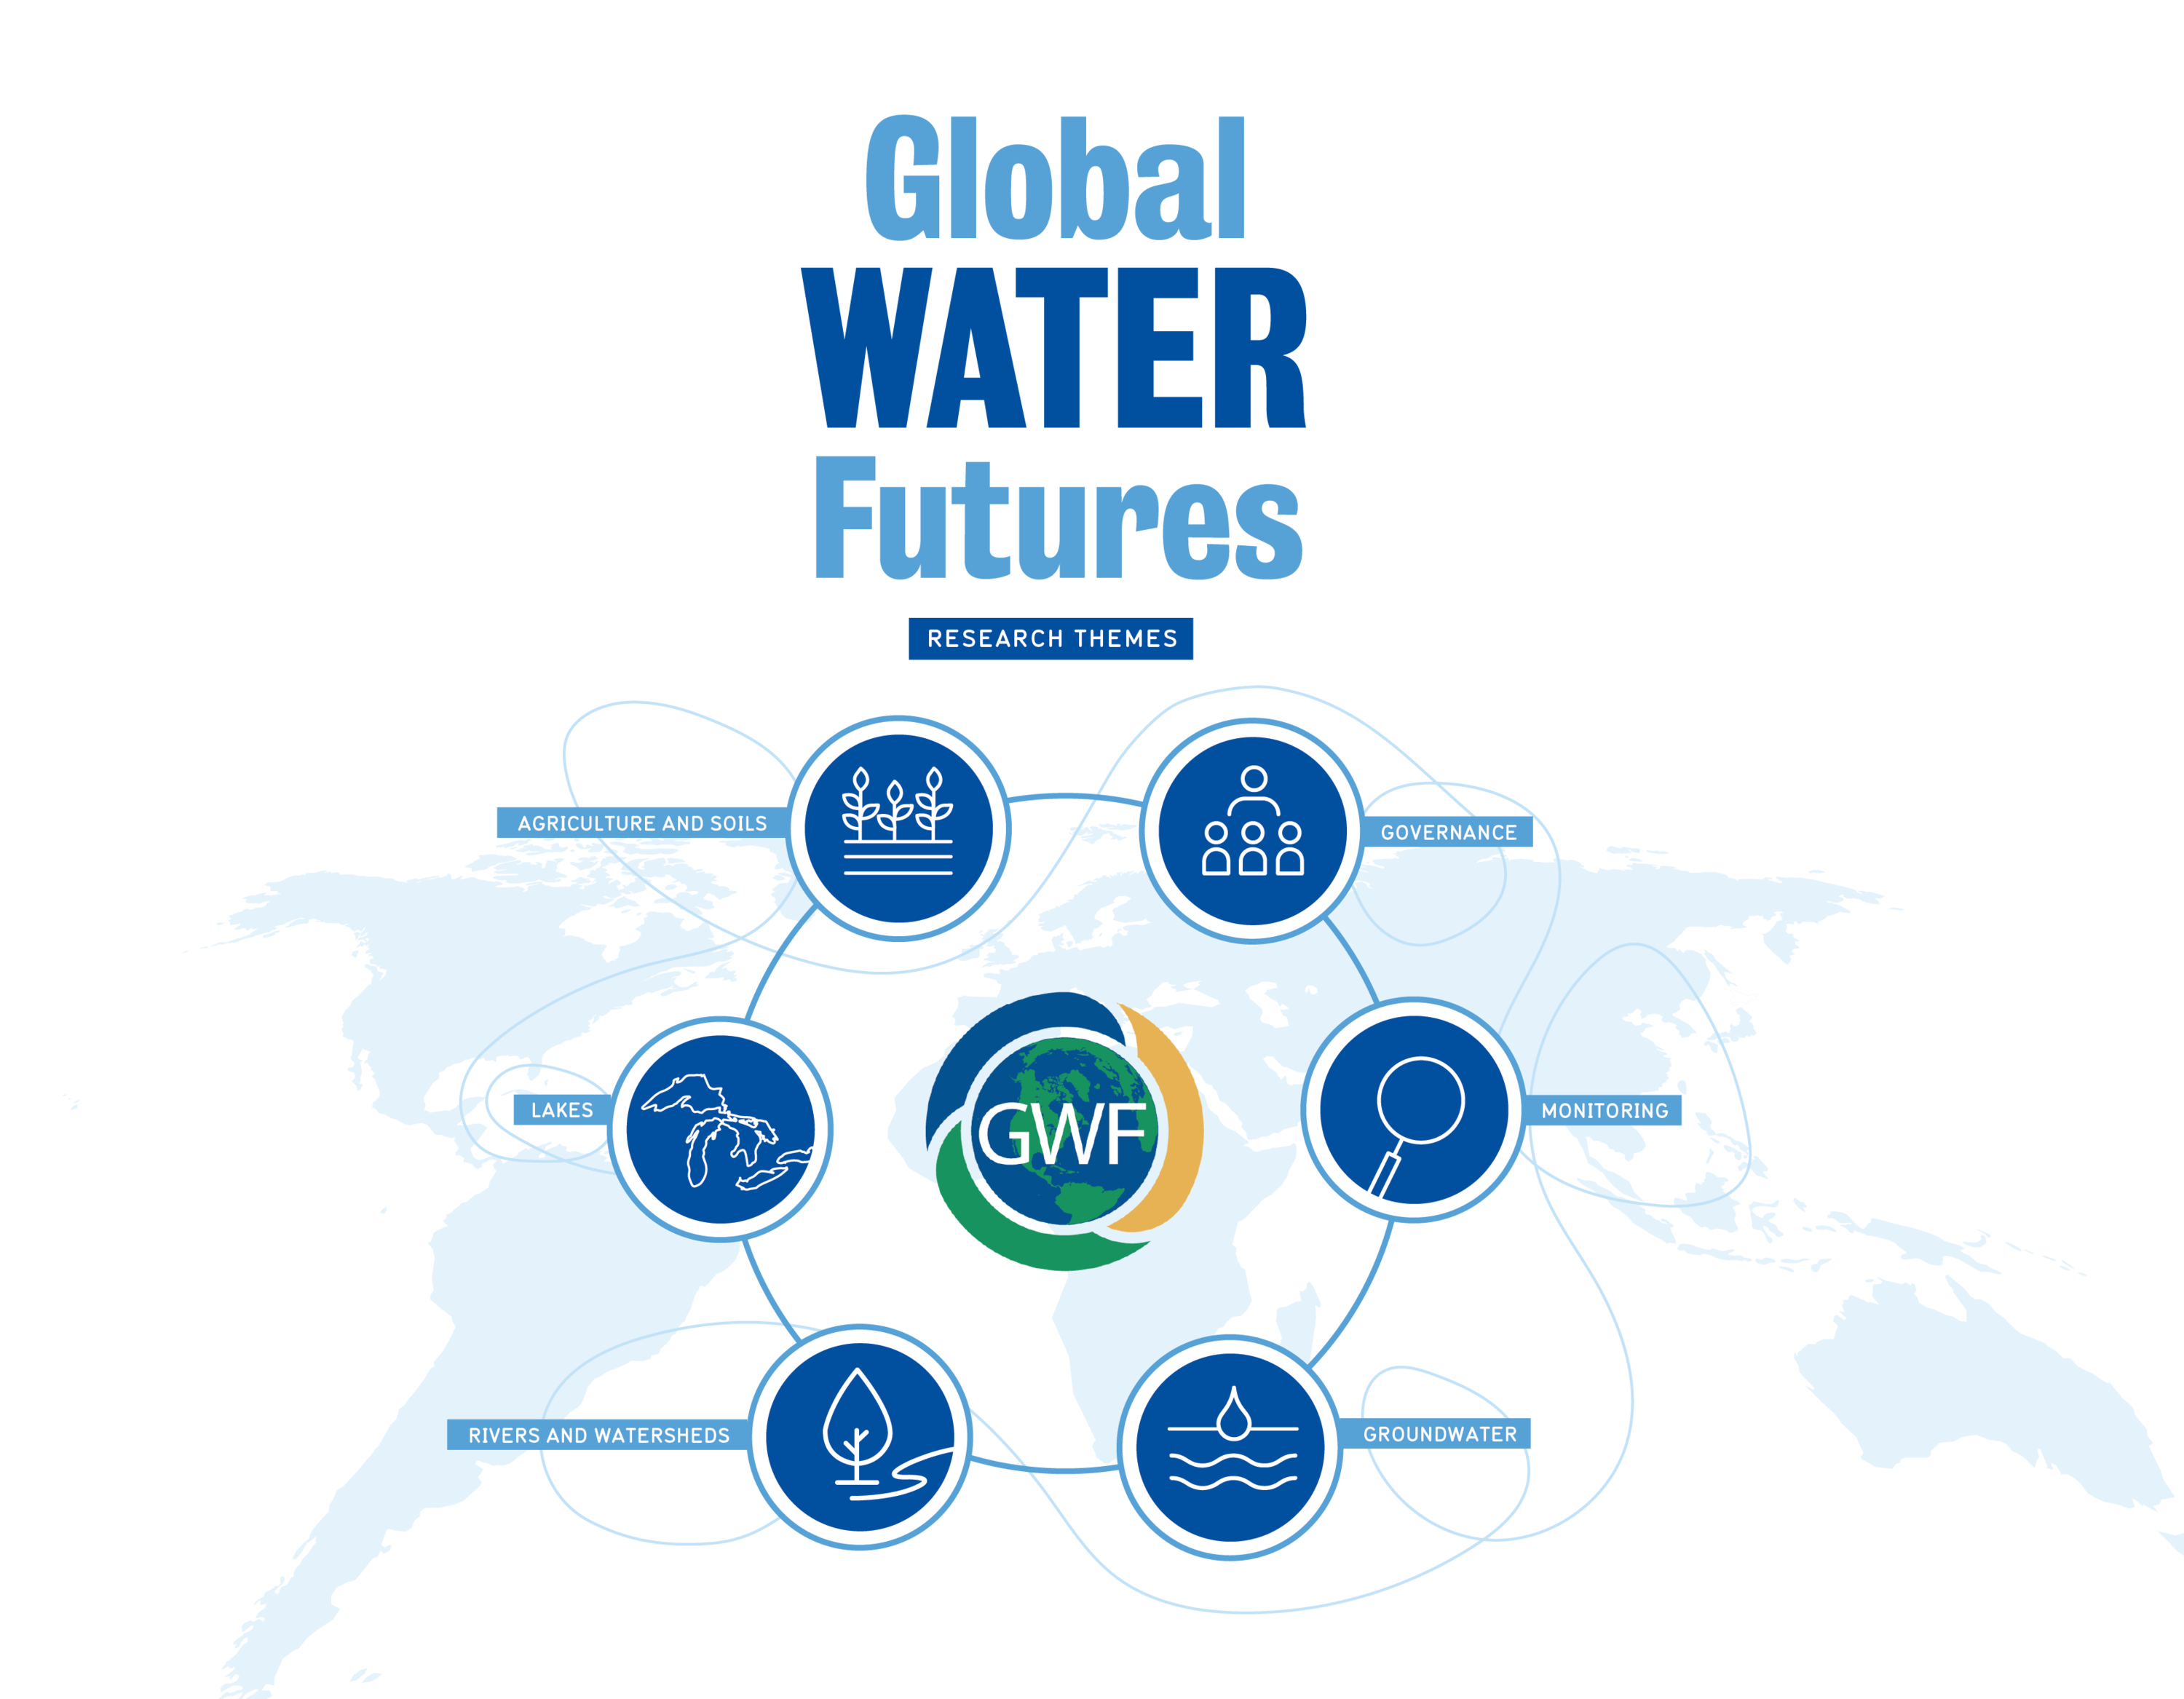 Global Water Futures infographic